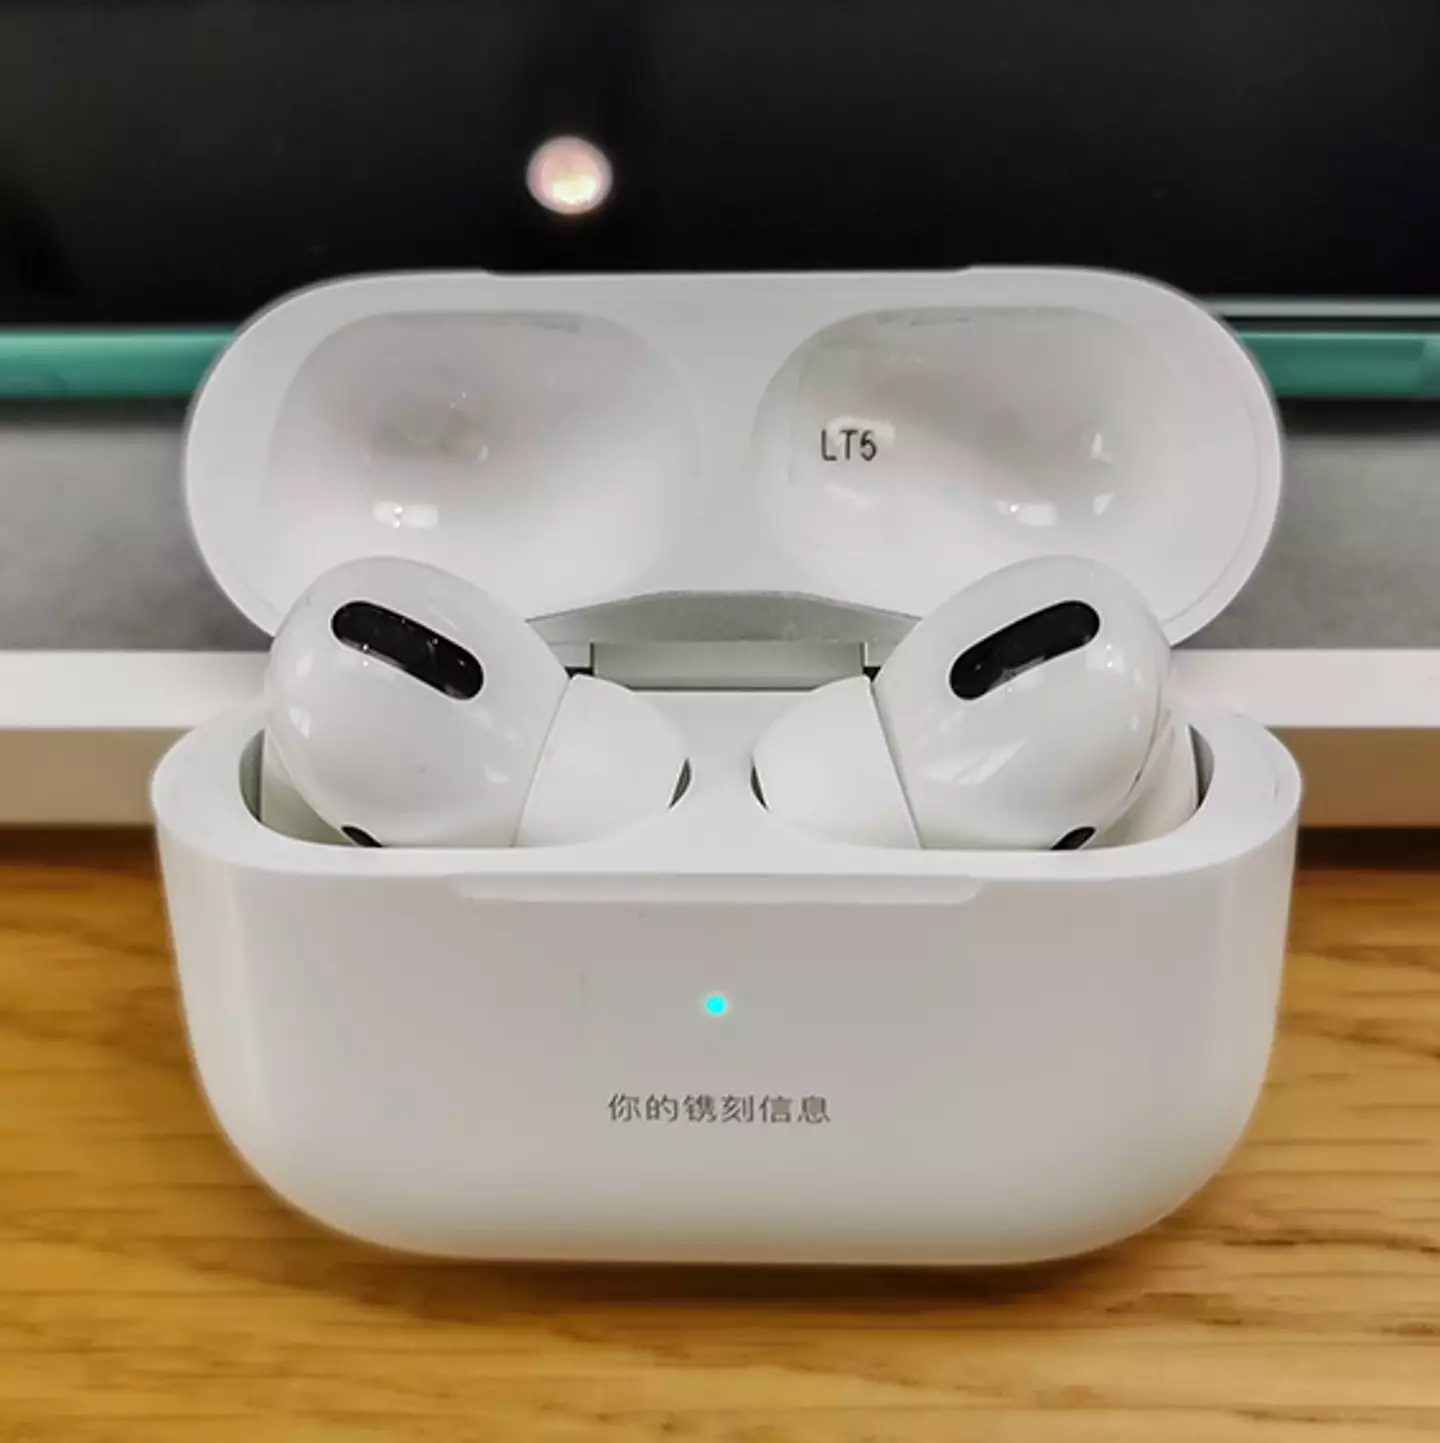 Apple introduces head nodding gesture for AirPods Pro to create 'seamless hands-free experience'